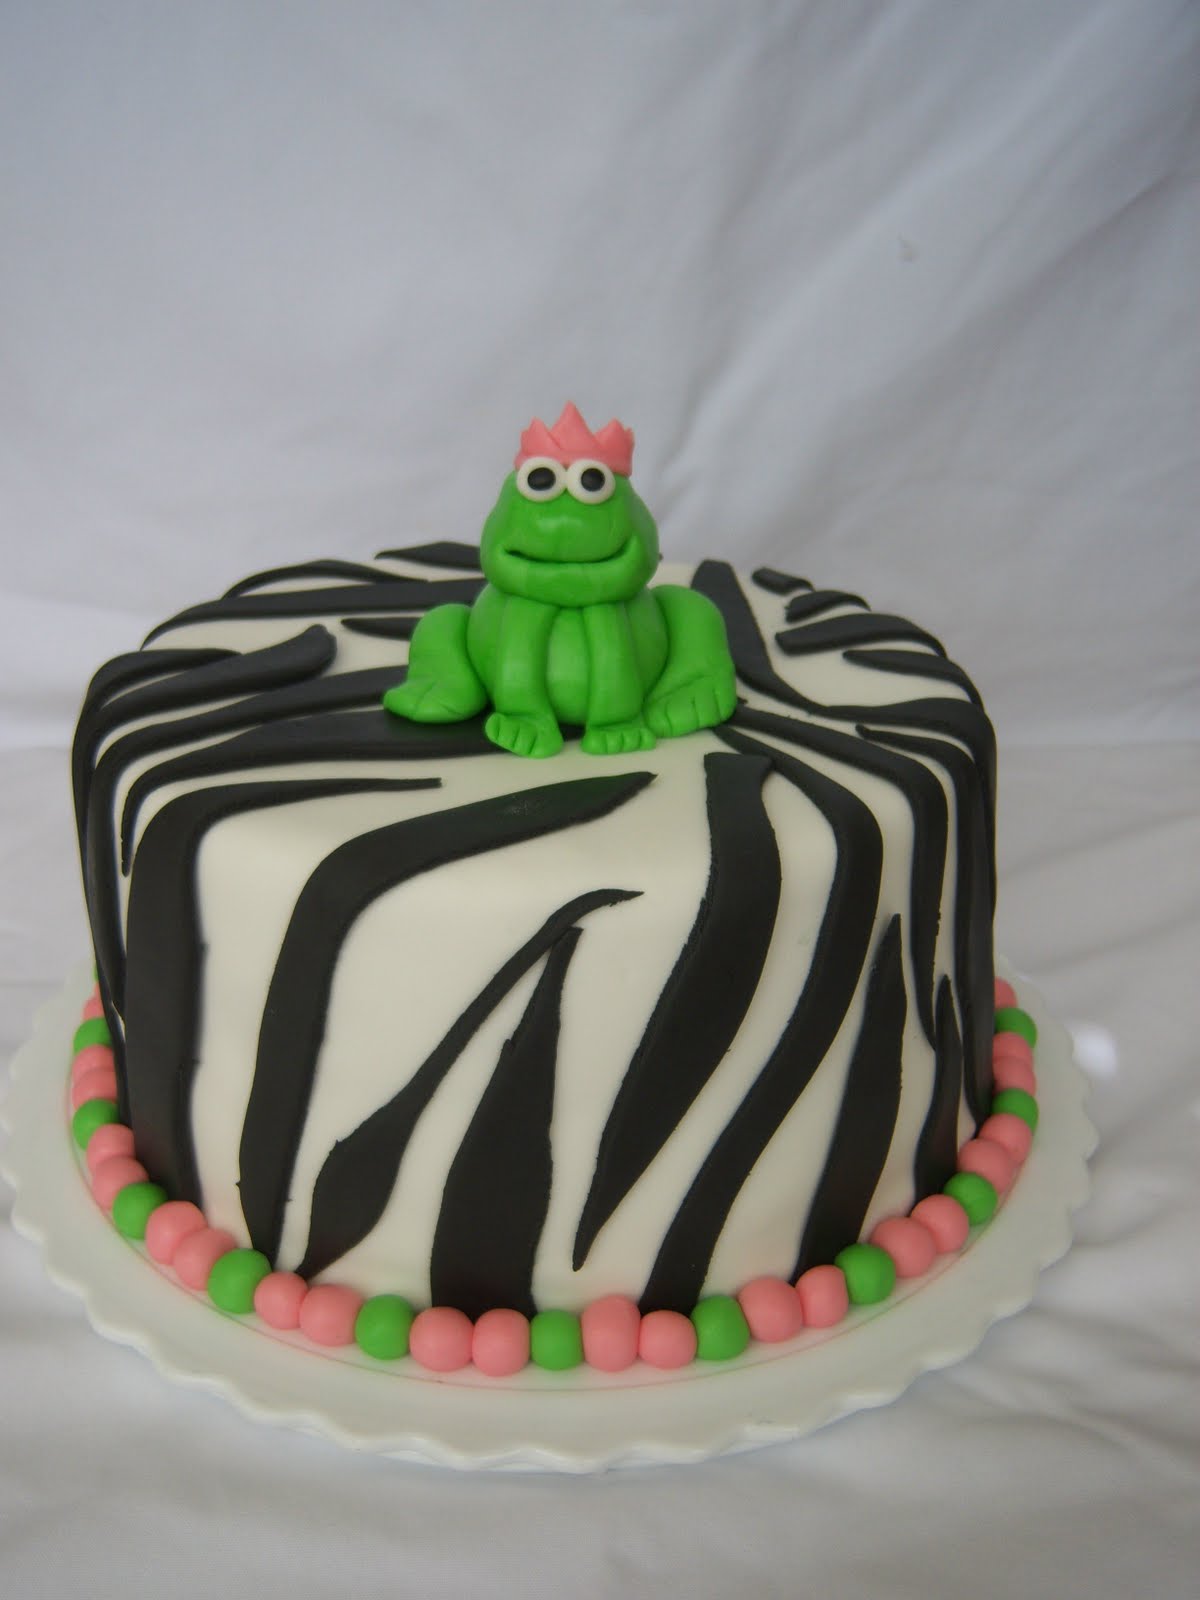 simple chocolate cake decorating ideas favorite animal at the zoo is the zebra. So, she wanted a zebra cake 